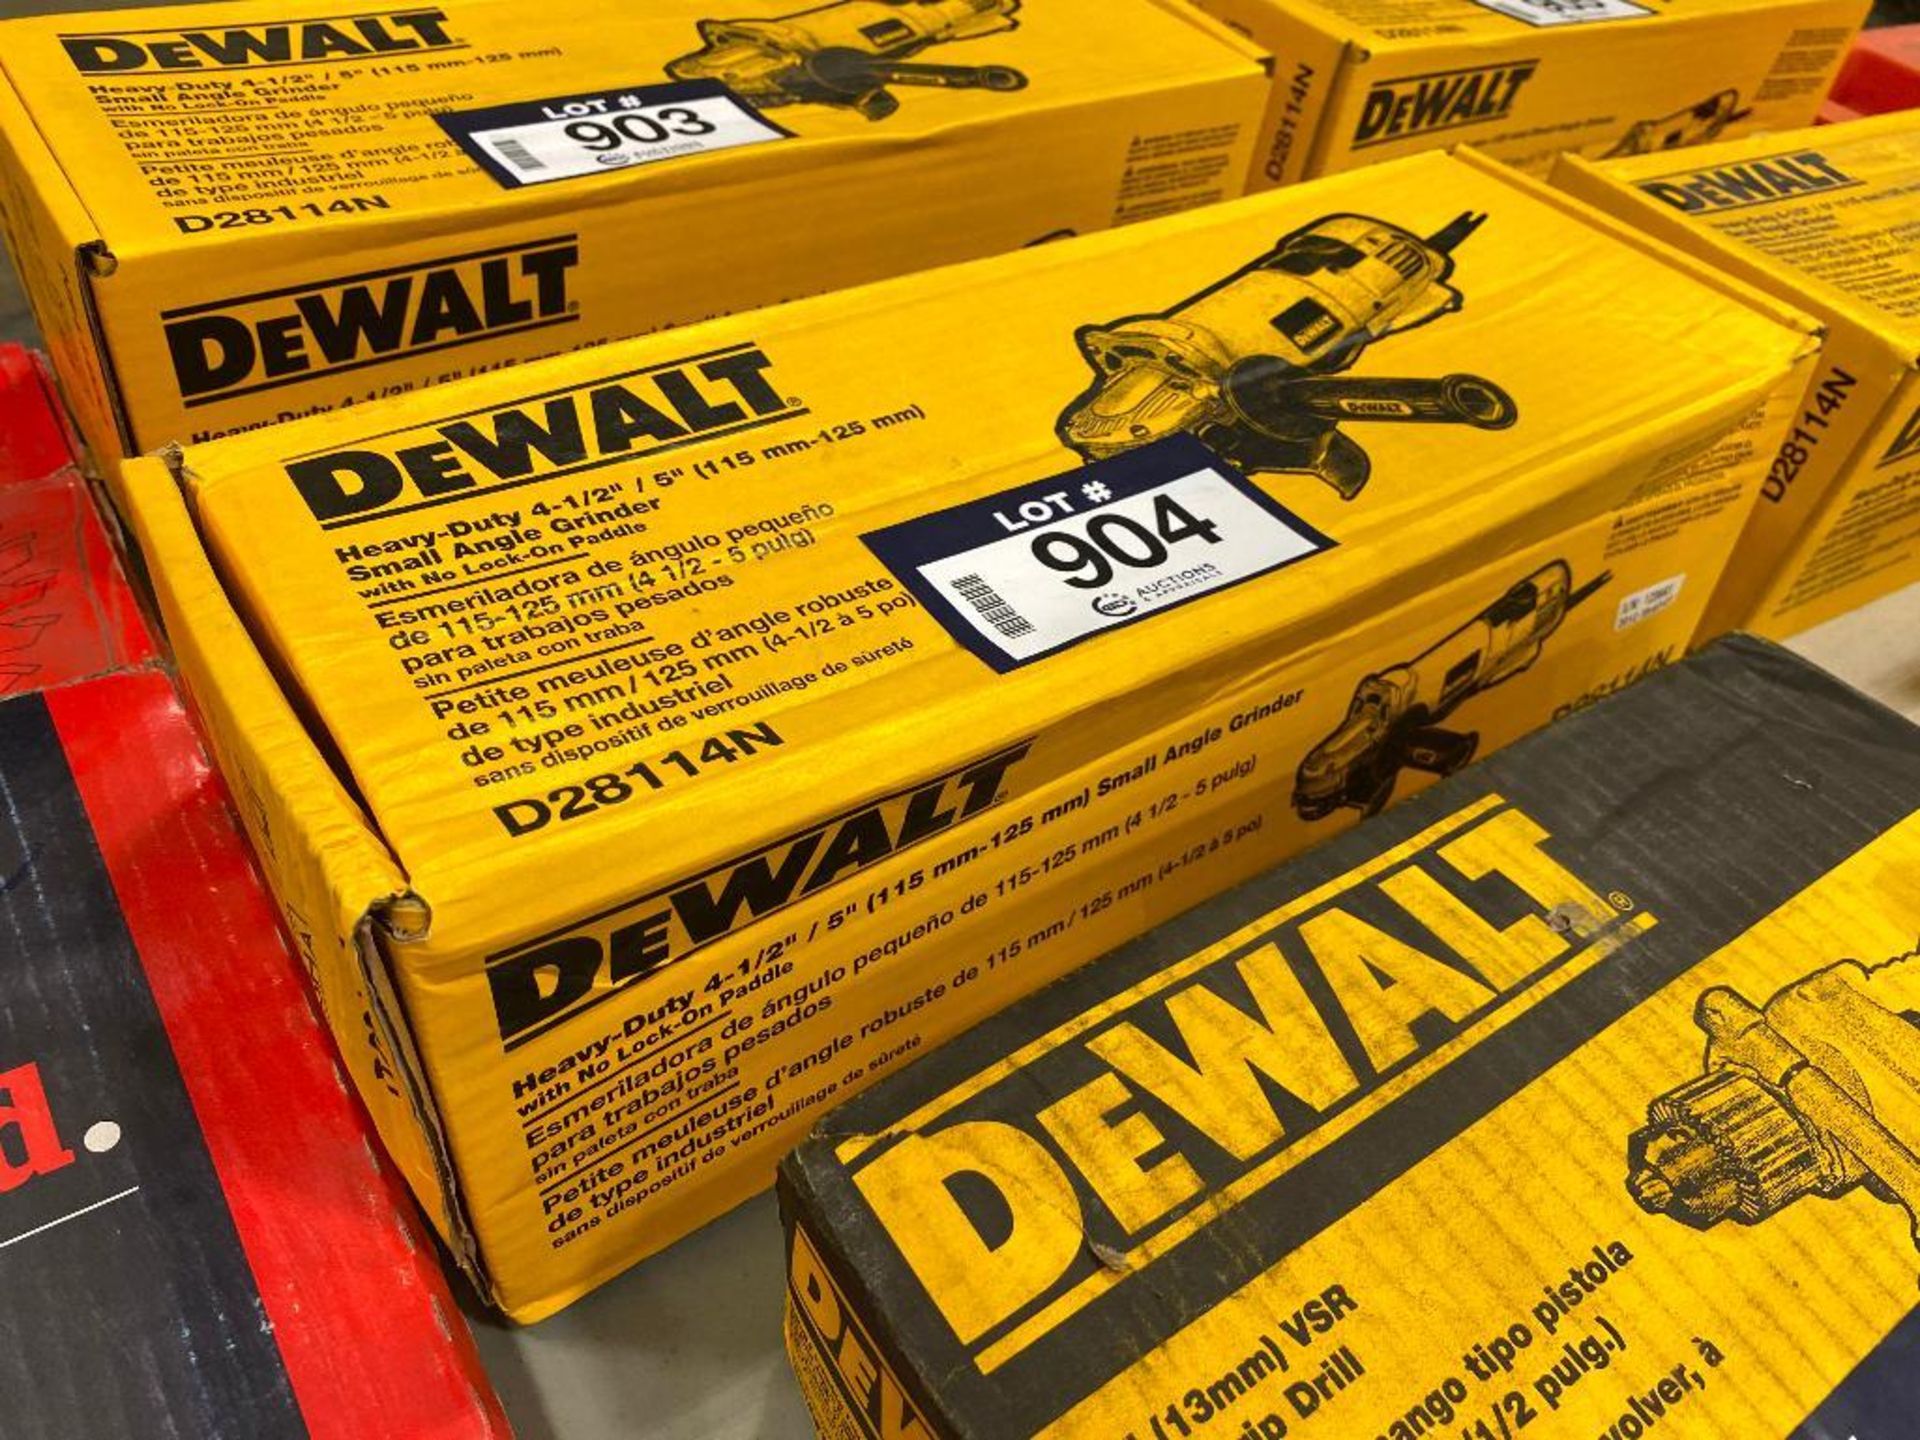 Dewalt Heavy-Duty 4-1/2" /5" Small Angle Grinder with No Lock-On Paddle